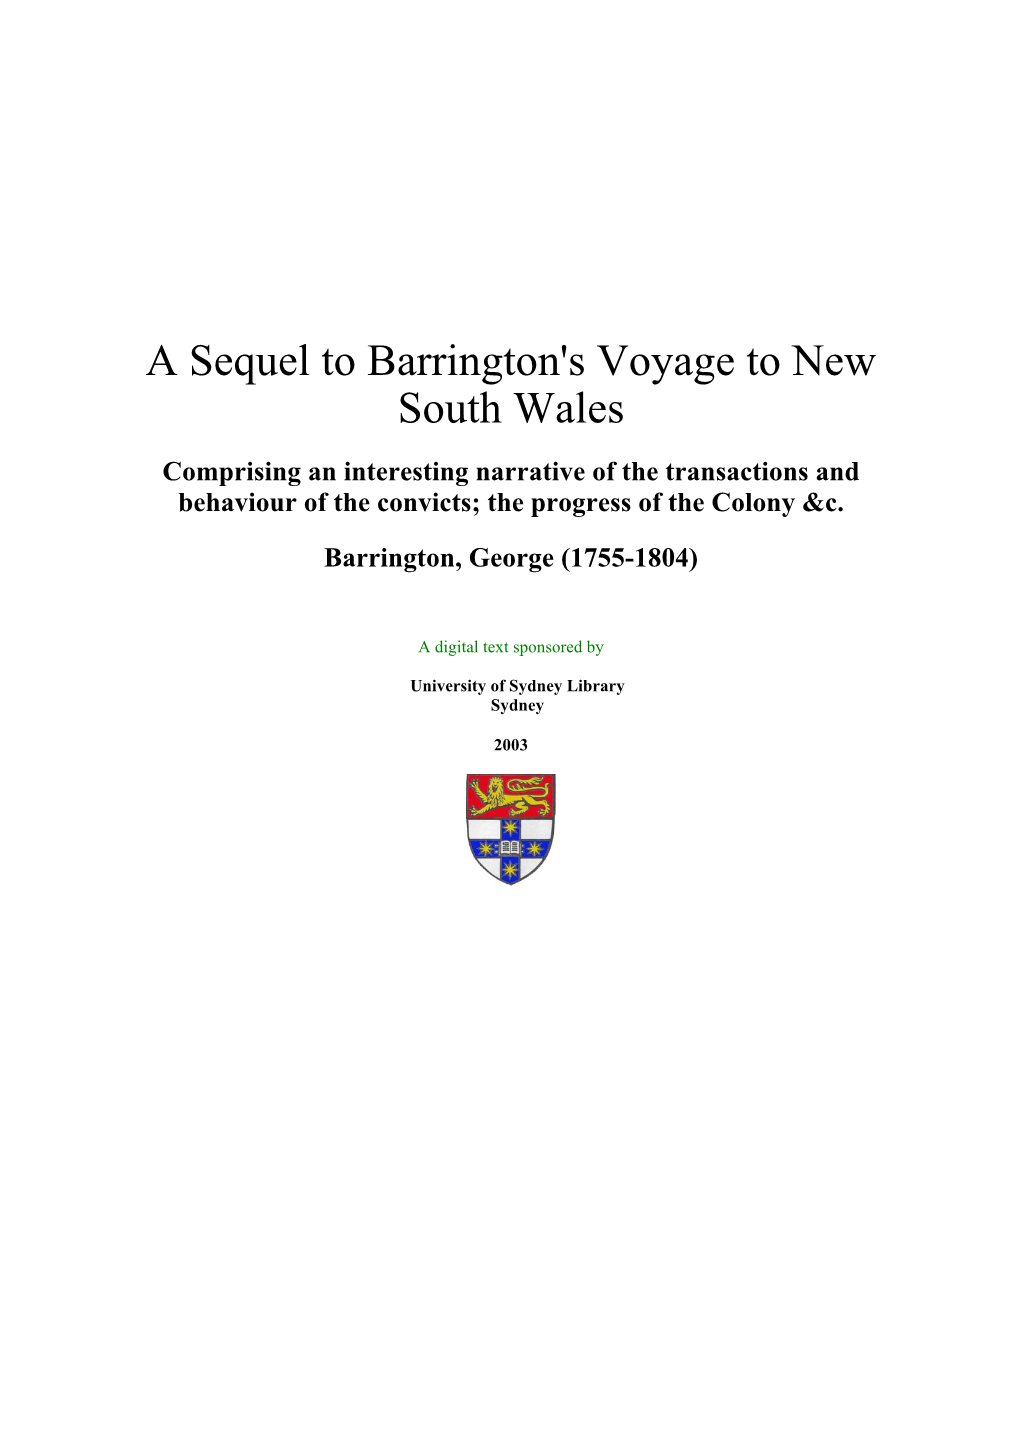 A Sequel to Barrington's Voyage to New South Wales